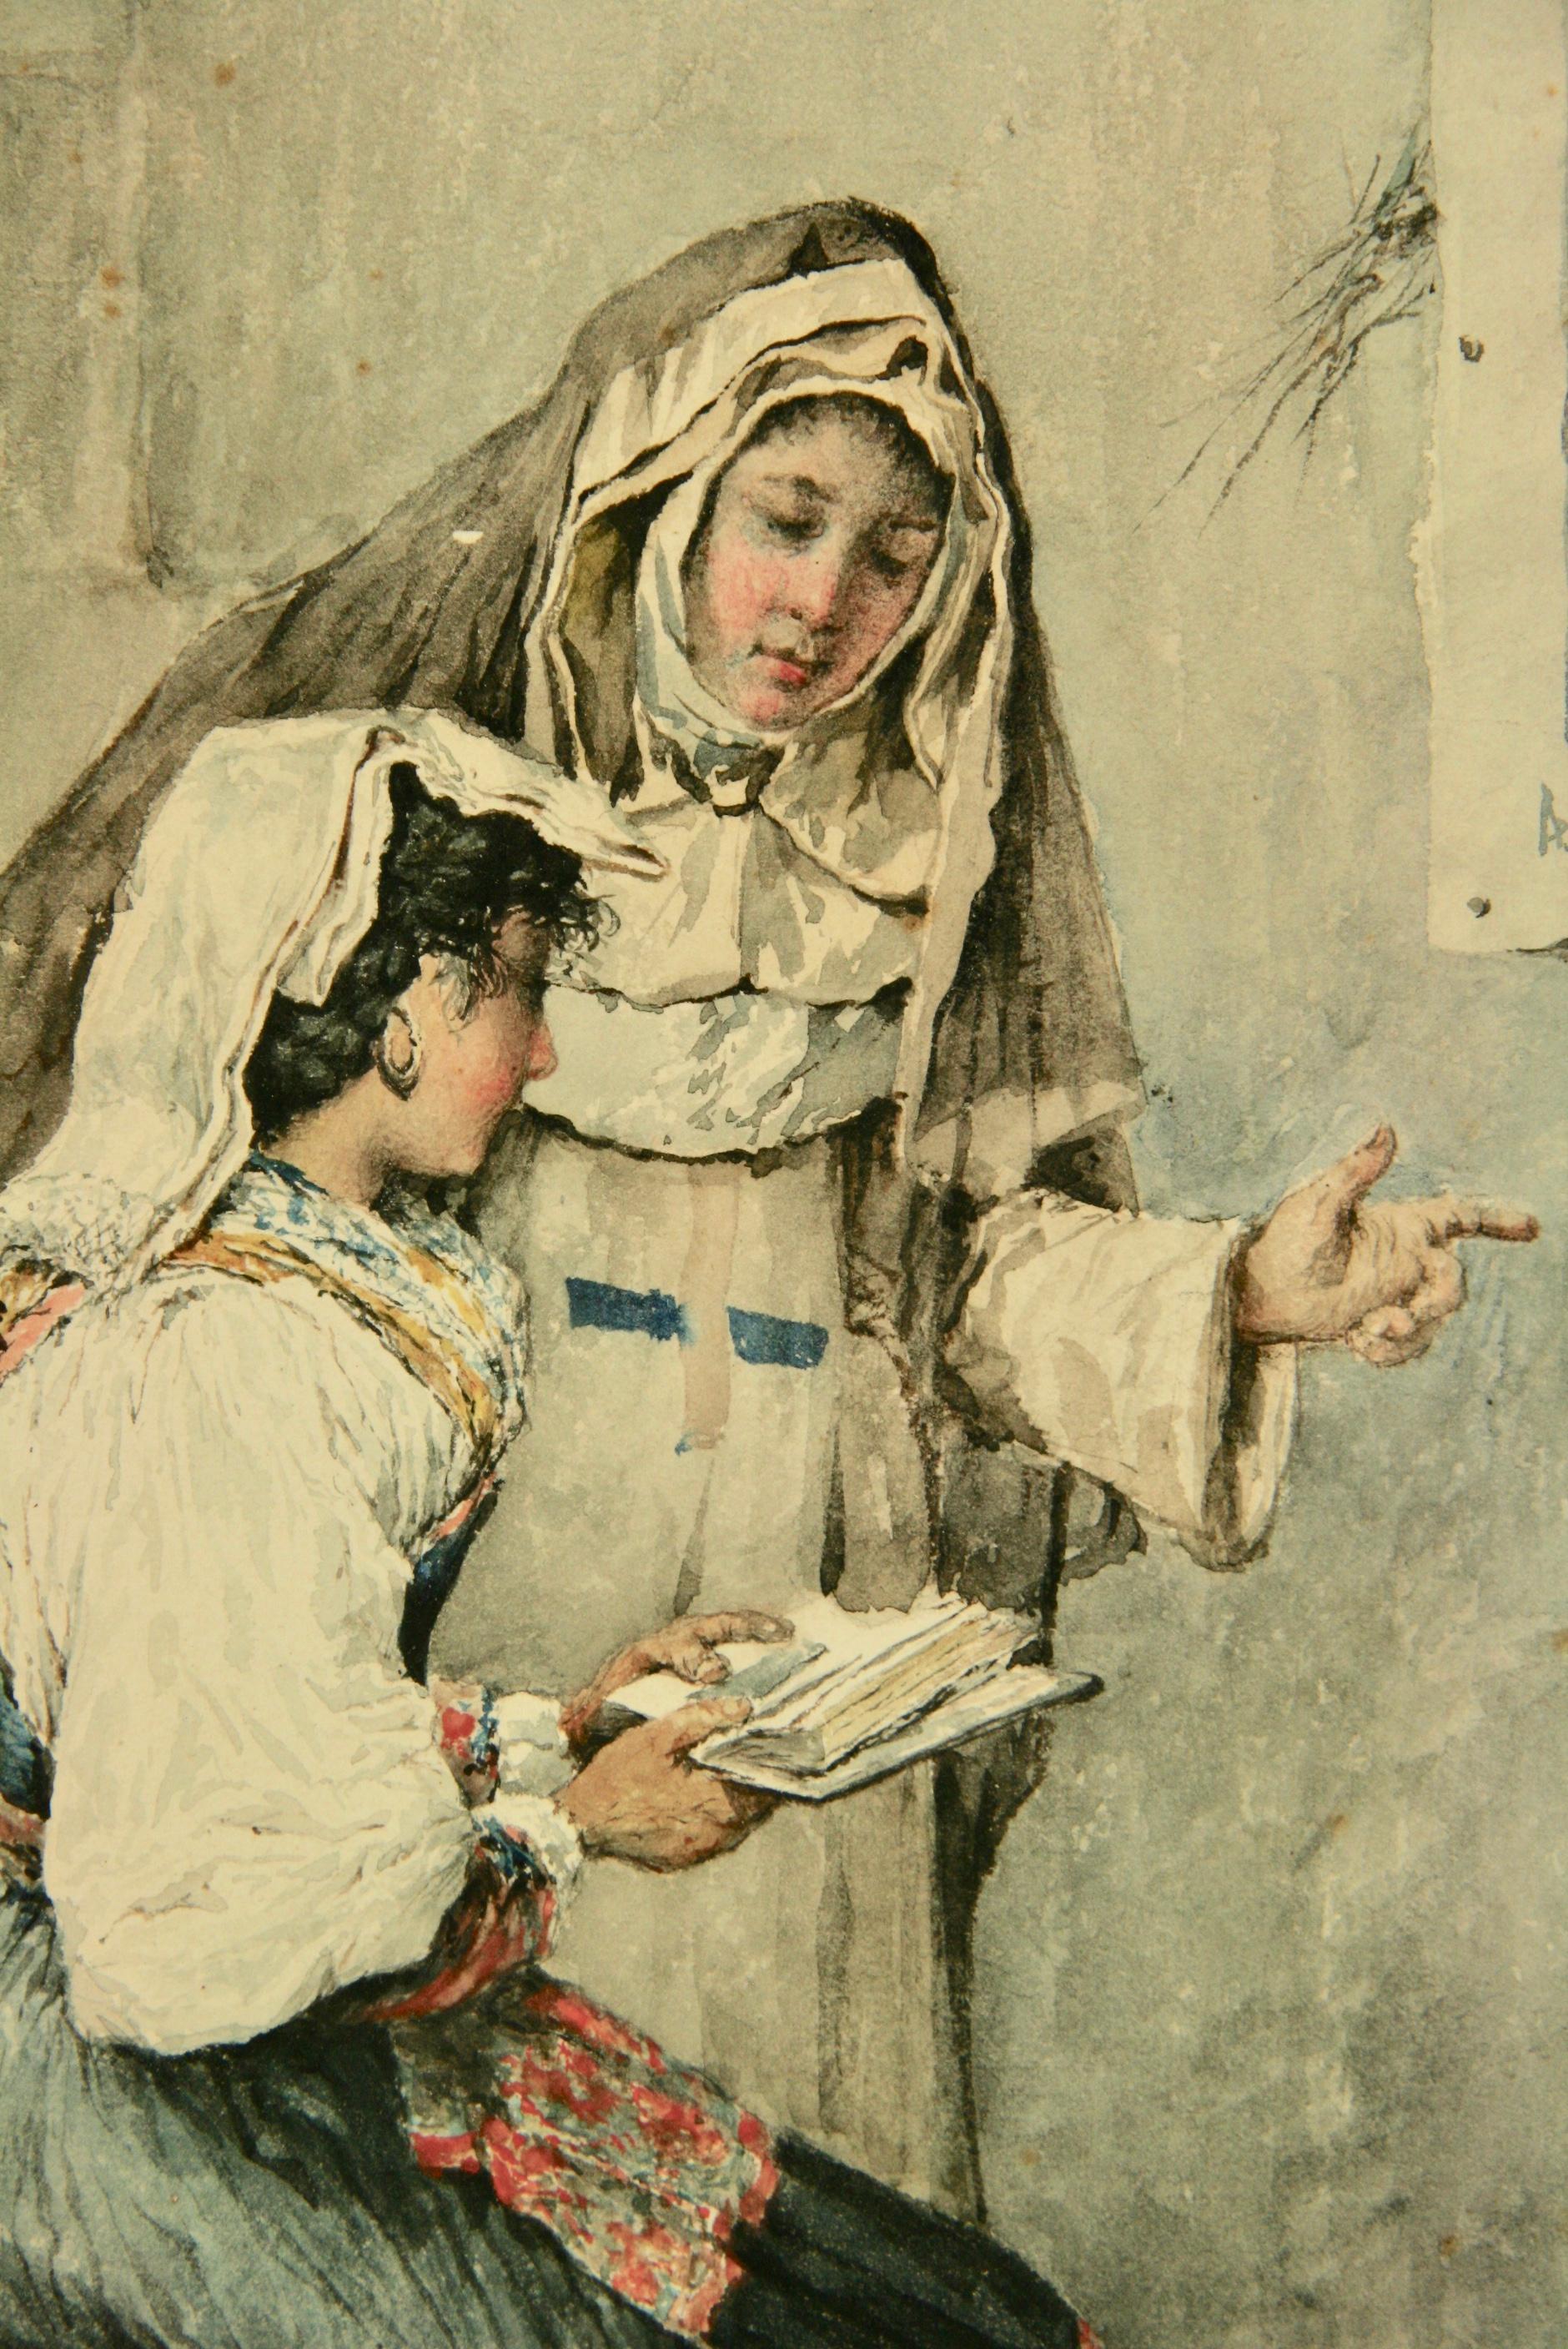   French Lessons Female Painting circa 1920's - Brown Figurative Painting by Unknown